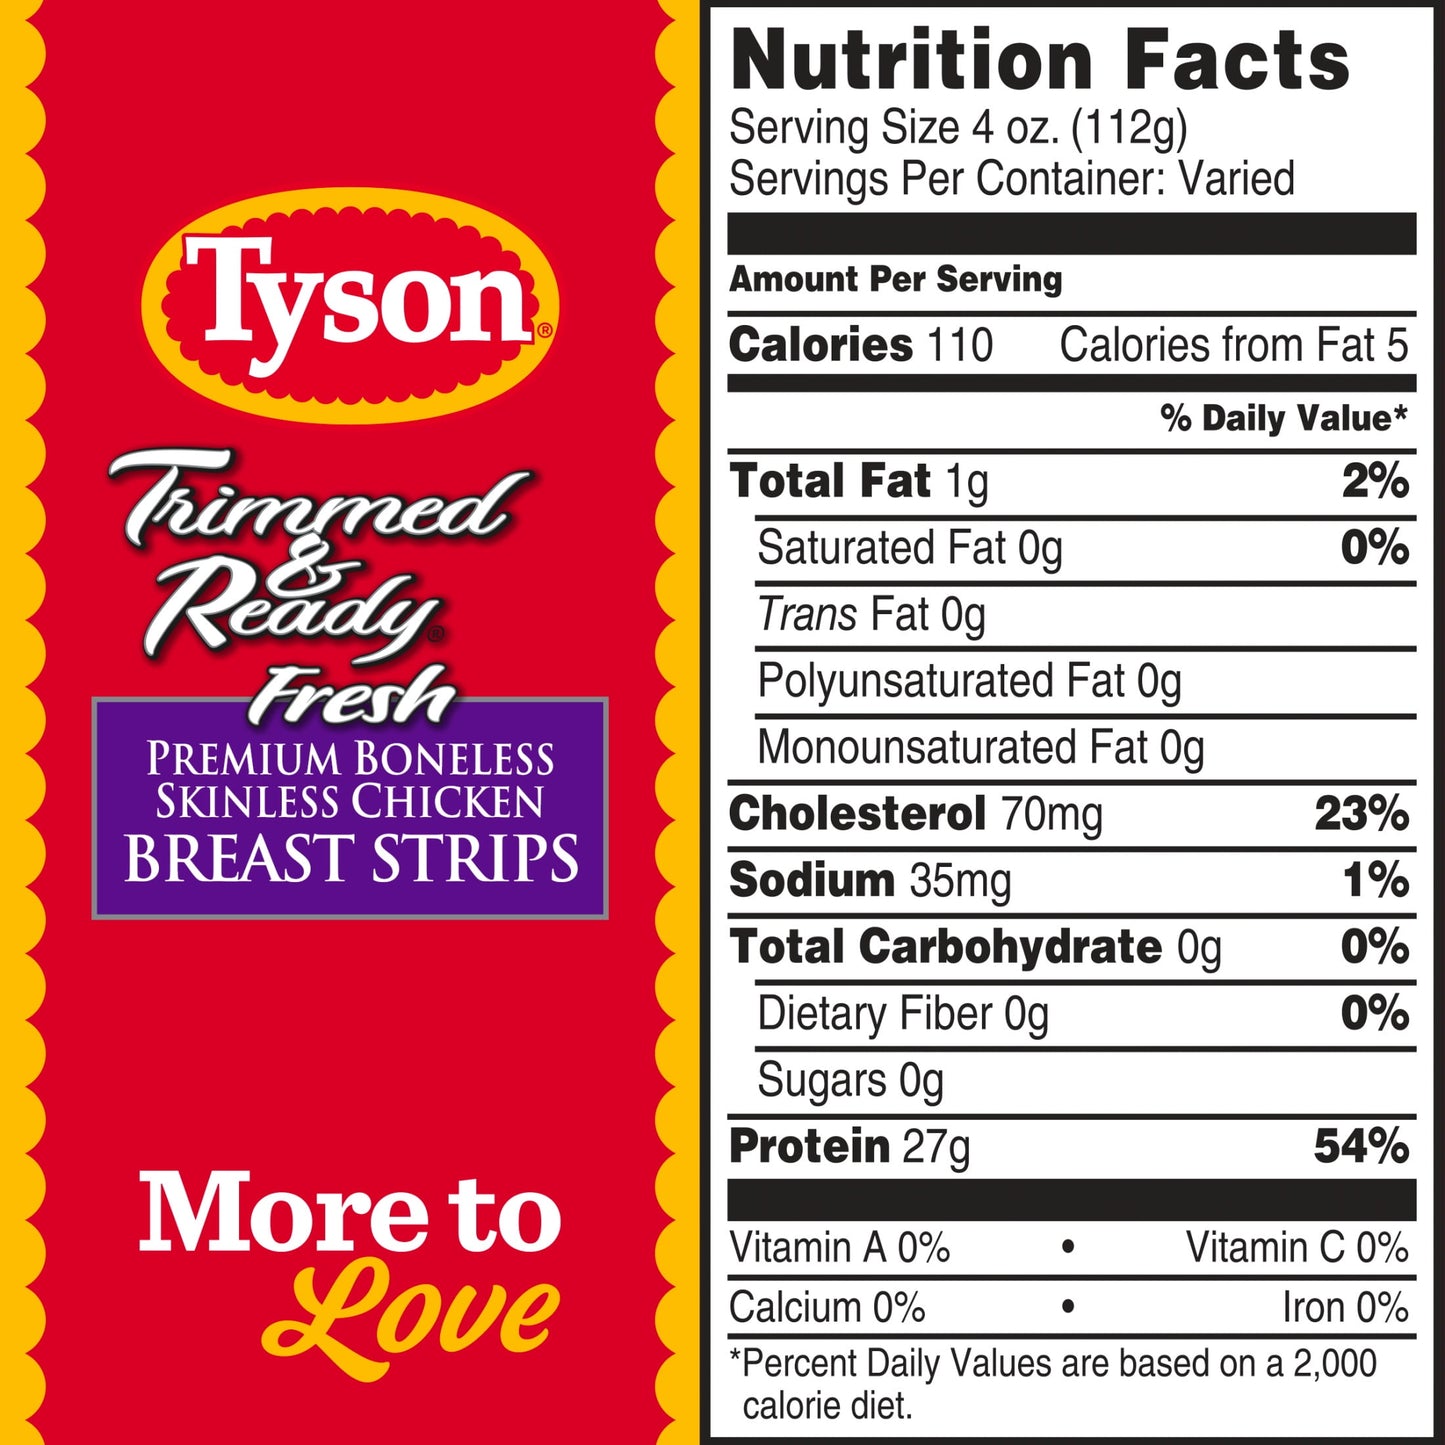 Tyson Trimmed & Ready All Natural Premium Boneless Skinless Chicken Breast Strips, 1.0 - 2.0 lb Tray